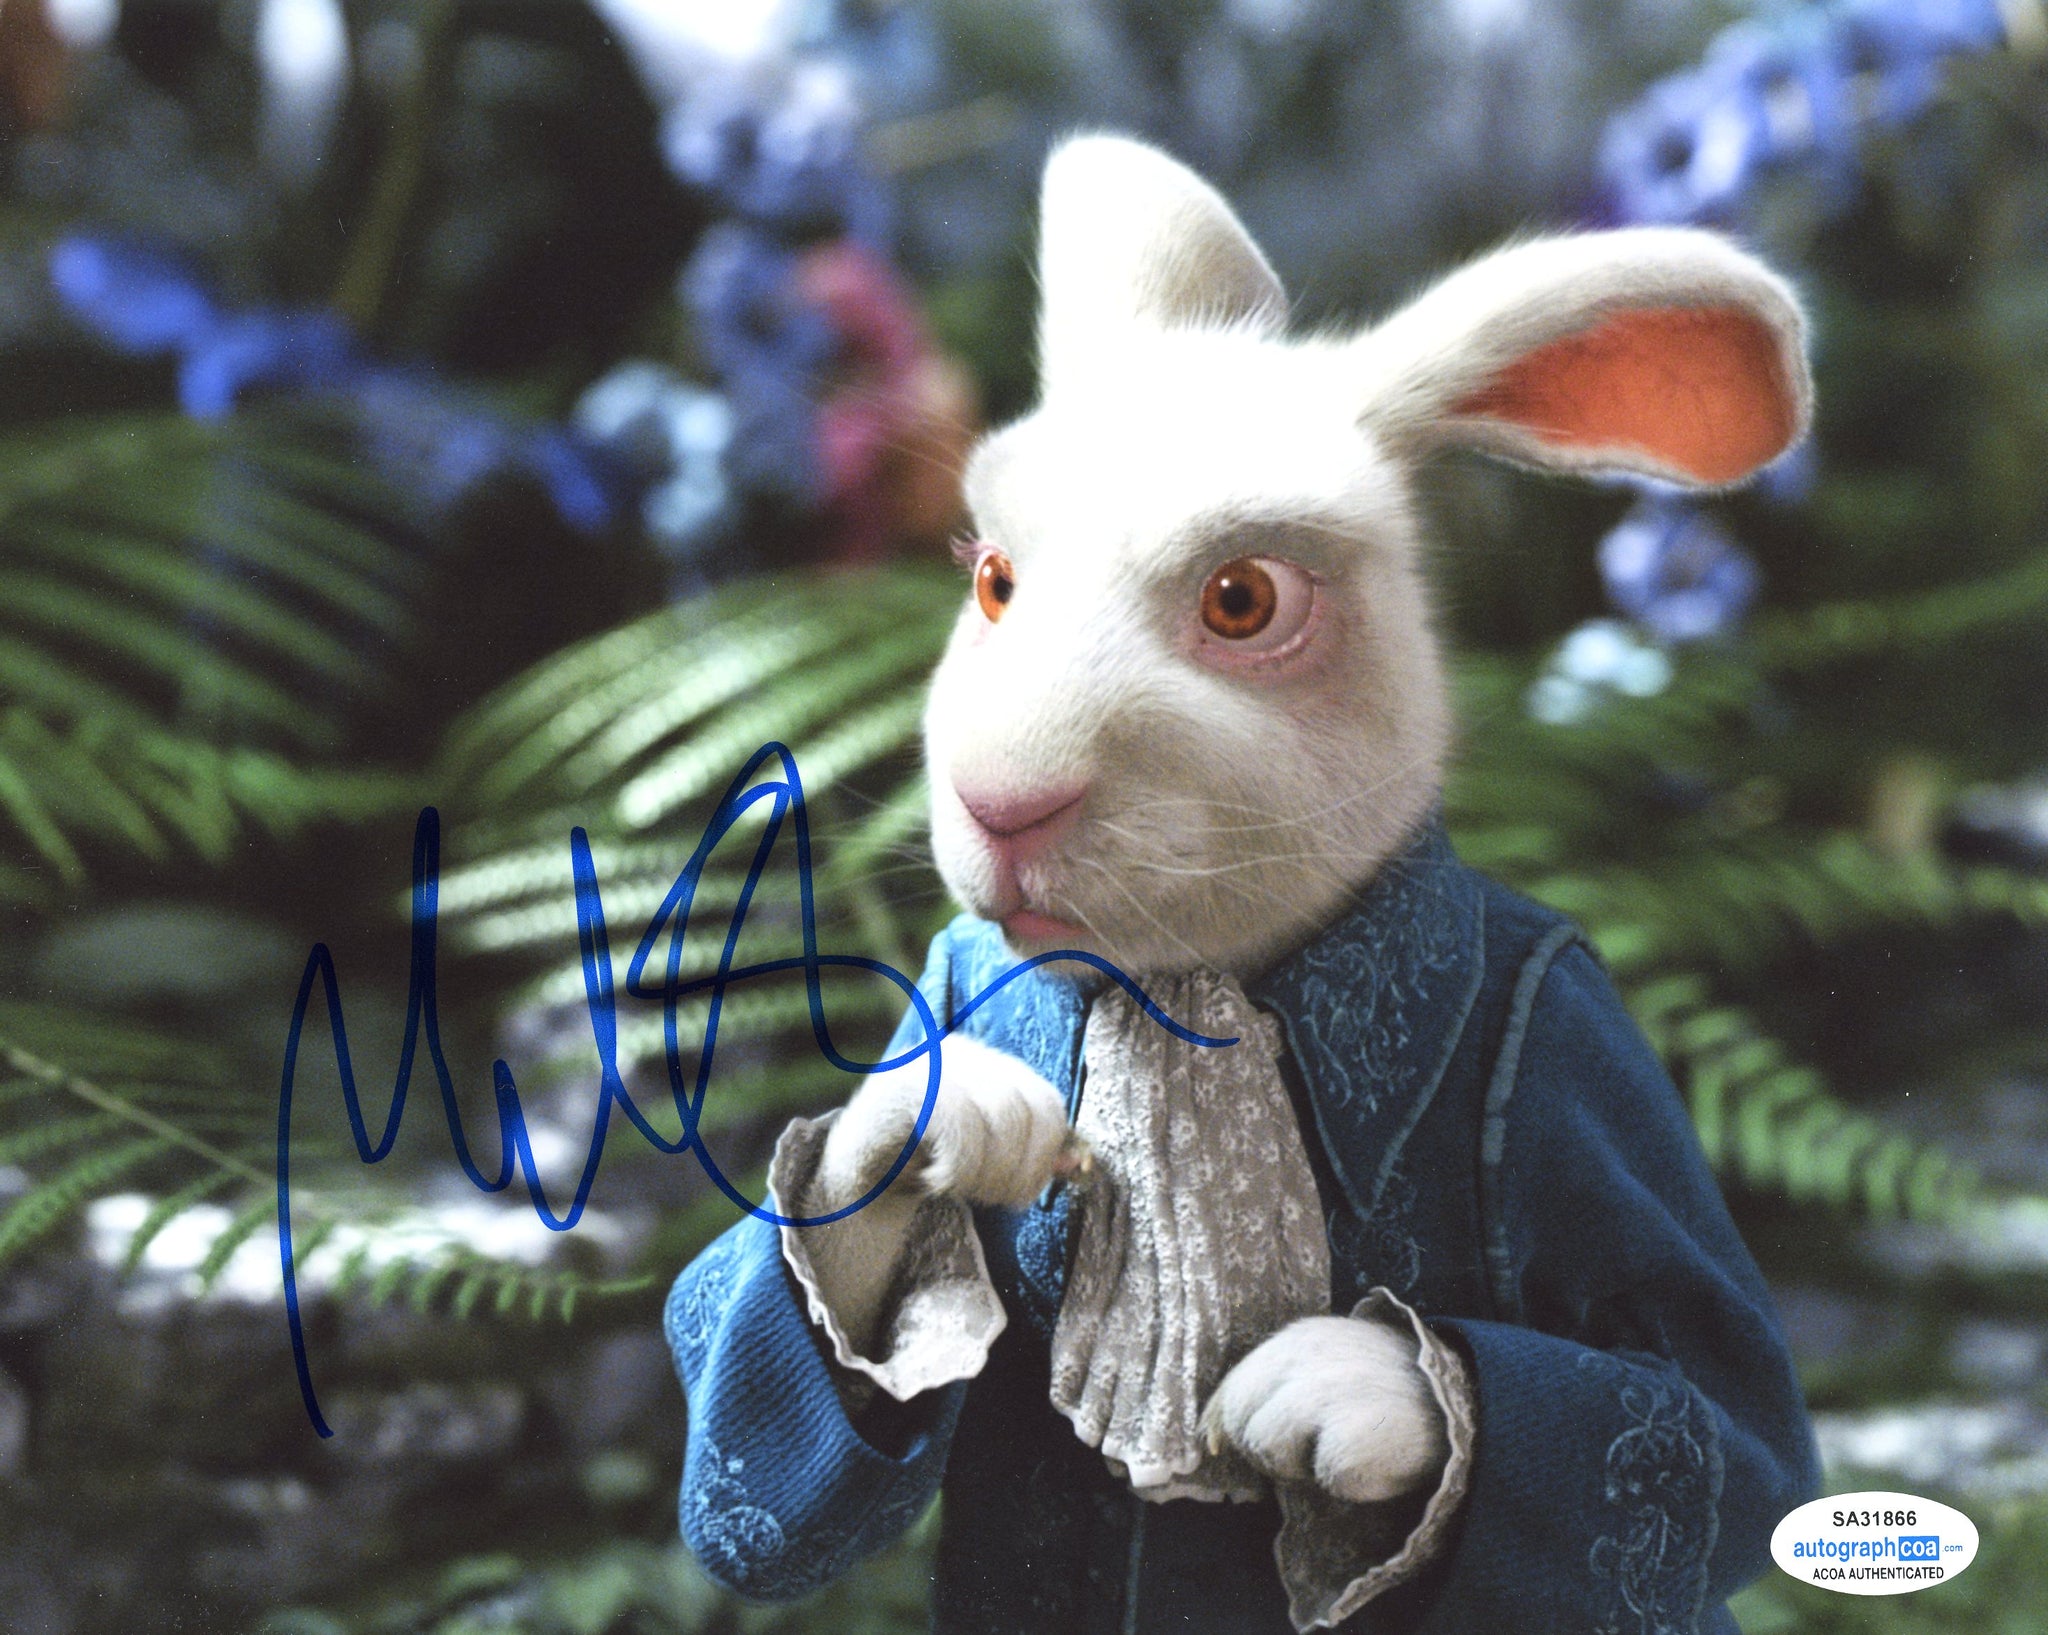 Michael Sheen Alice in Wonderland Signed Autograph 8x10 Photo ACOA #4 - Outlaw Hobbies Authentic Autographs